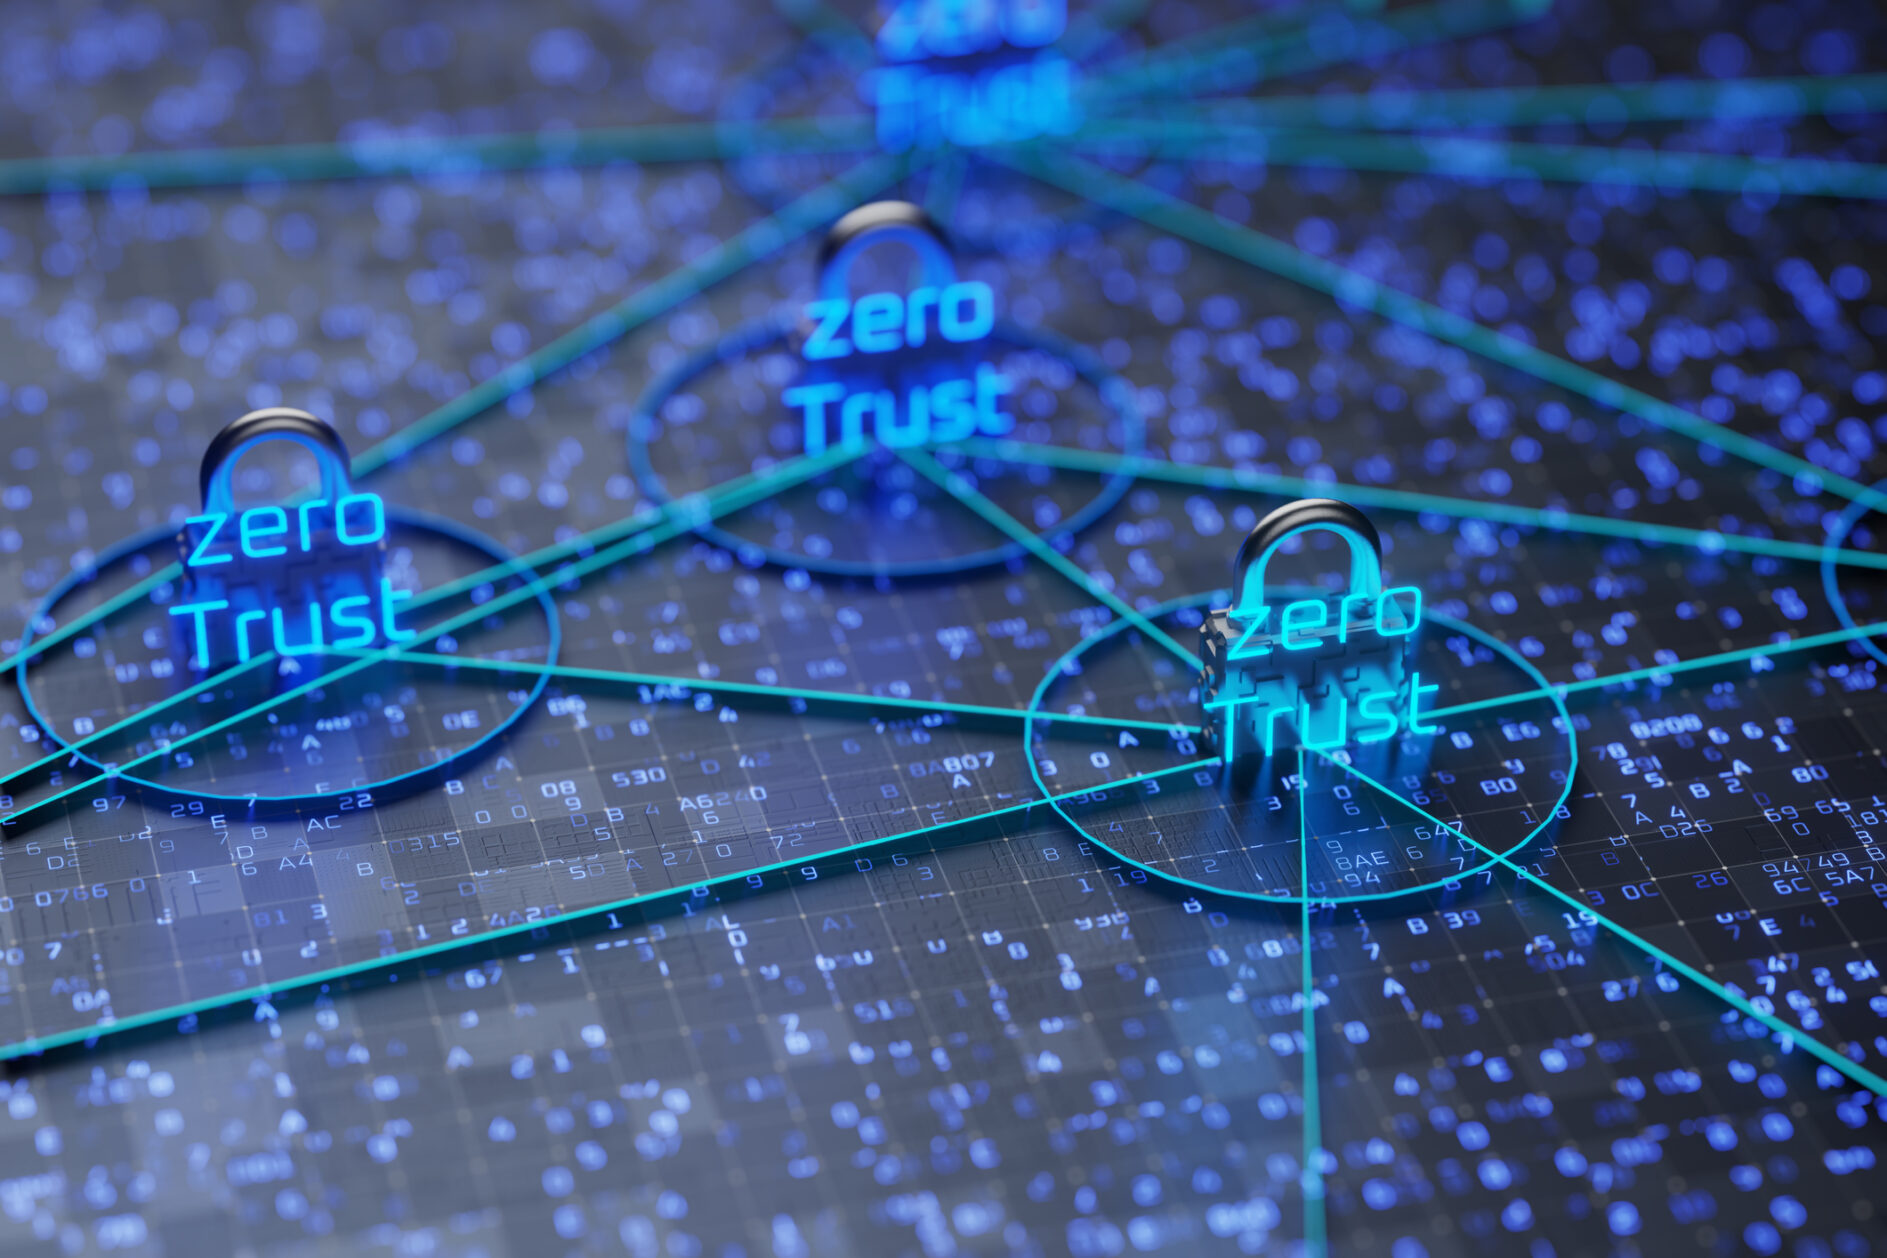 Trends in Zero Trust Strategies and Practices Remain Fragmented, but Many Are Seeing Success